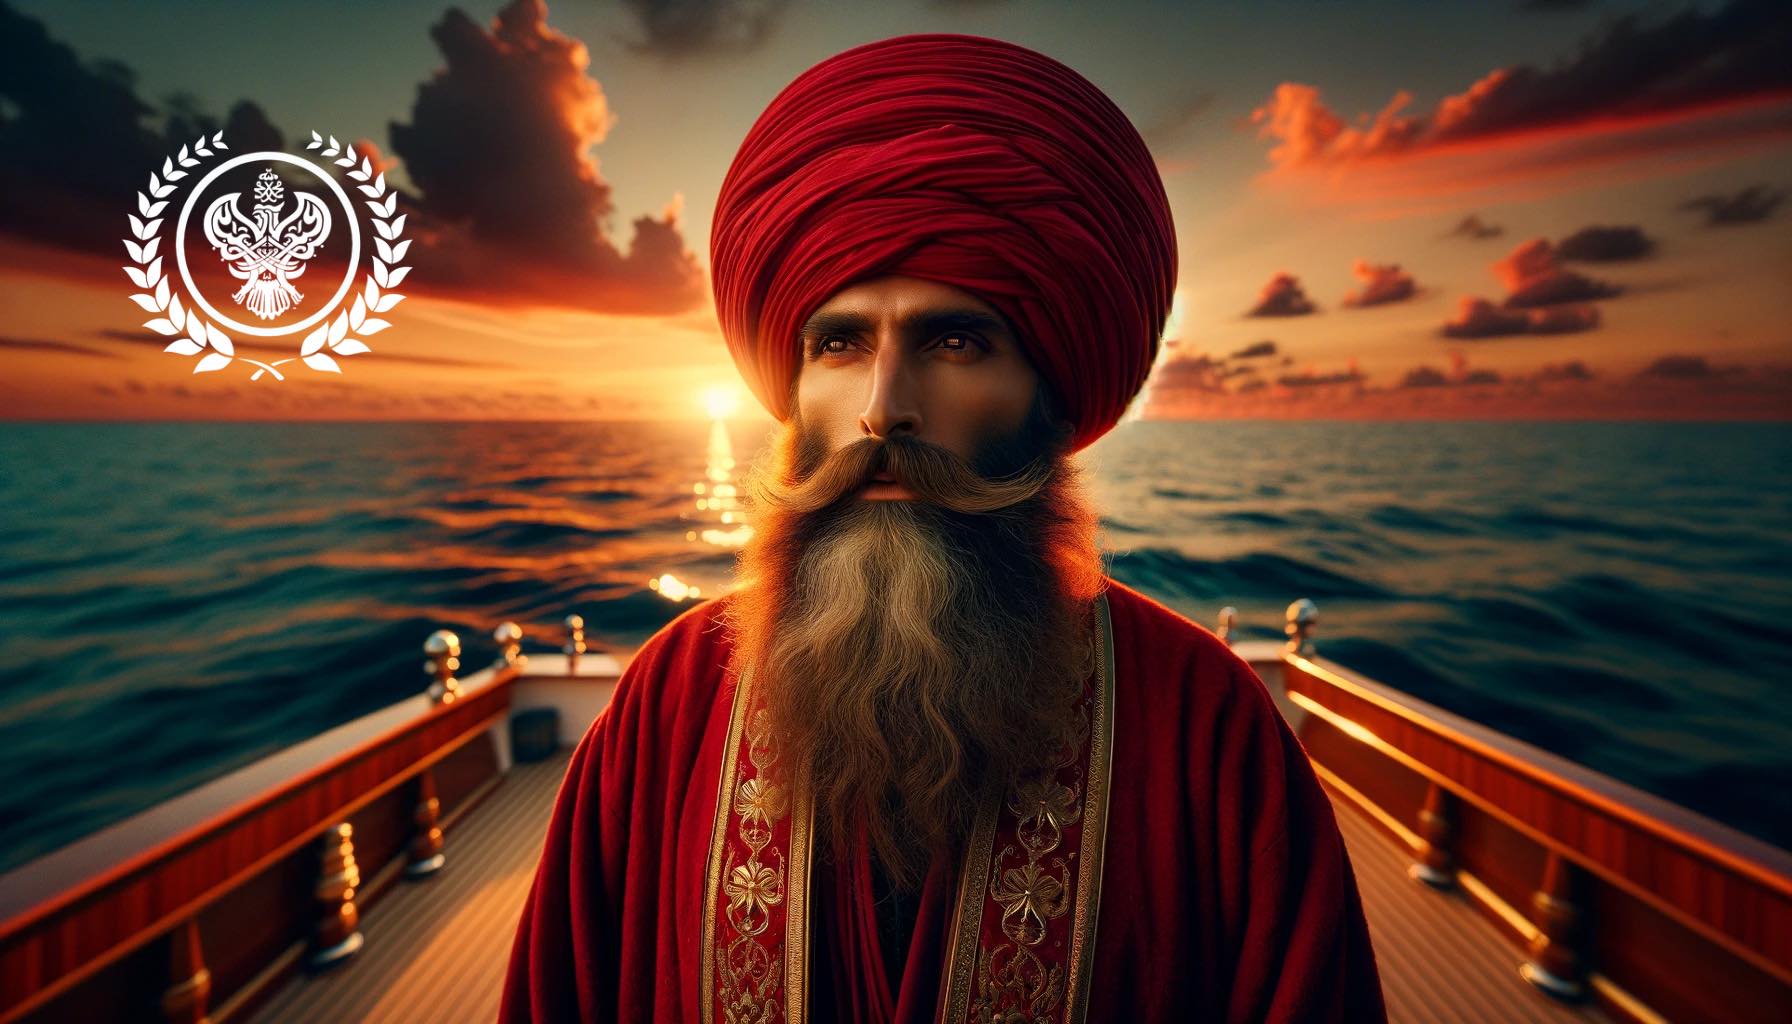 A sufi man in red on a vessel on water